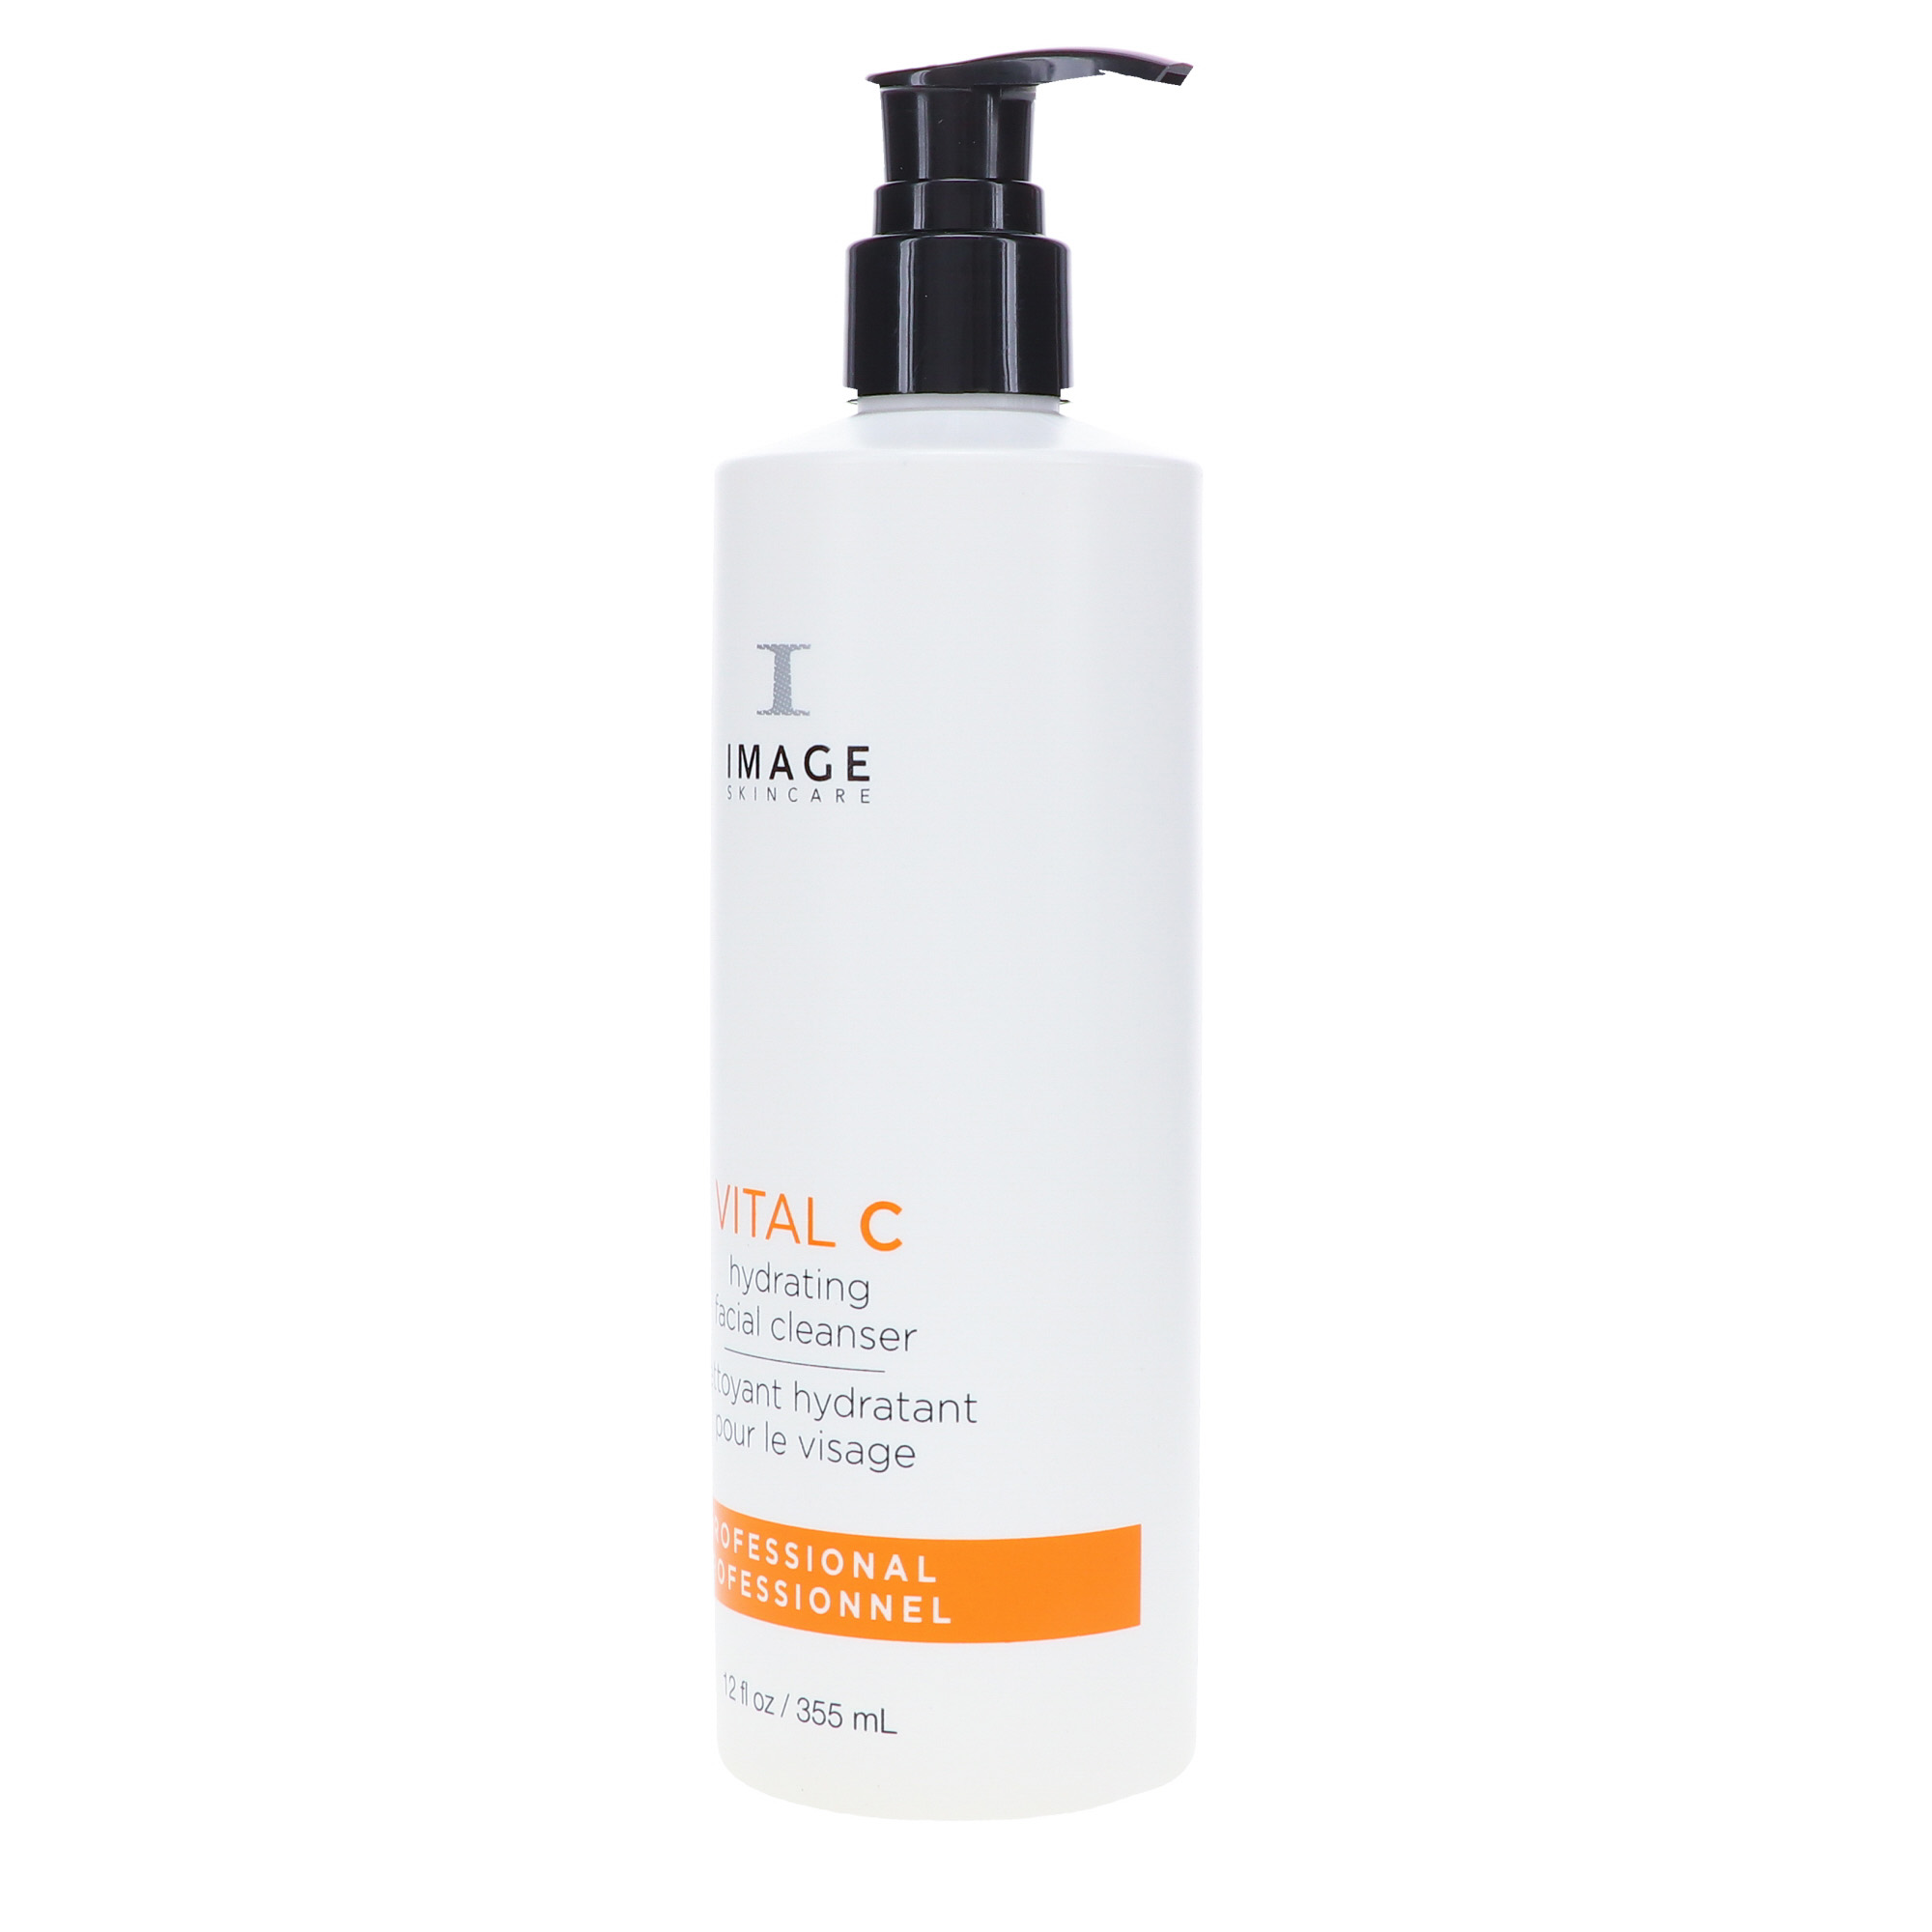 IMAGE Skincare Vital C Hydrating Facial Cleanser 12 oz - image 3 of 9